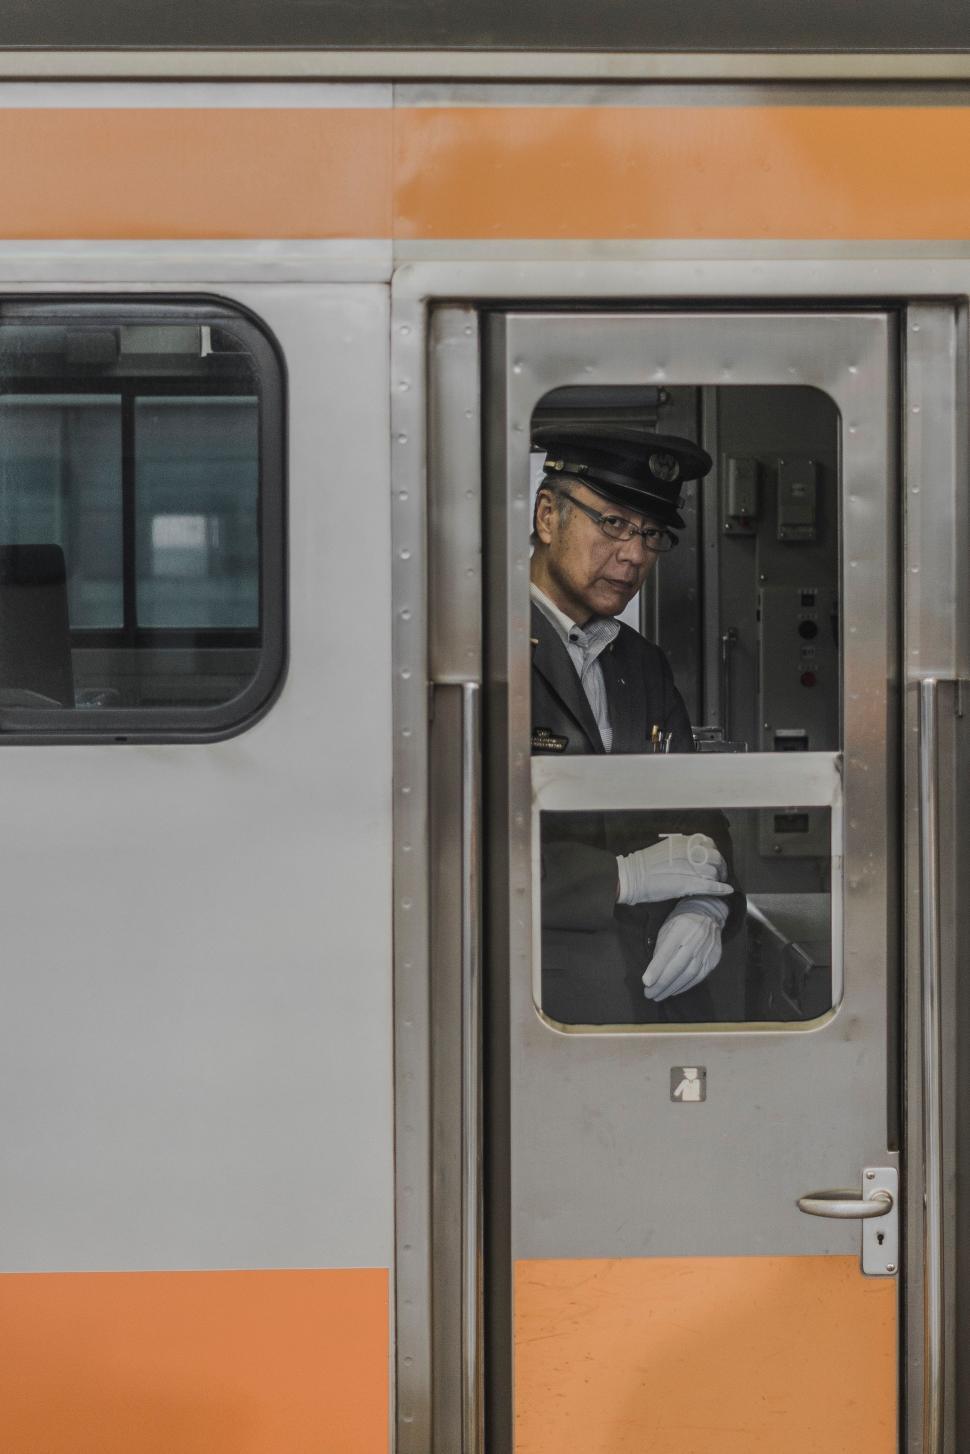 Free Image of Man in Suit and Hat on Train 